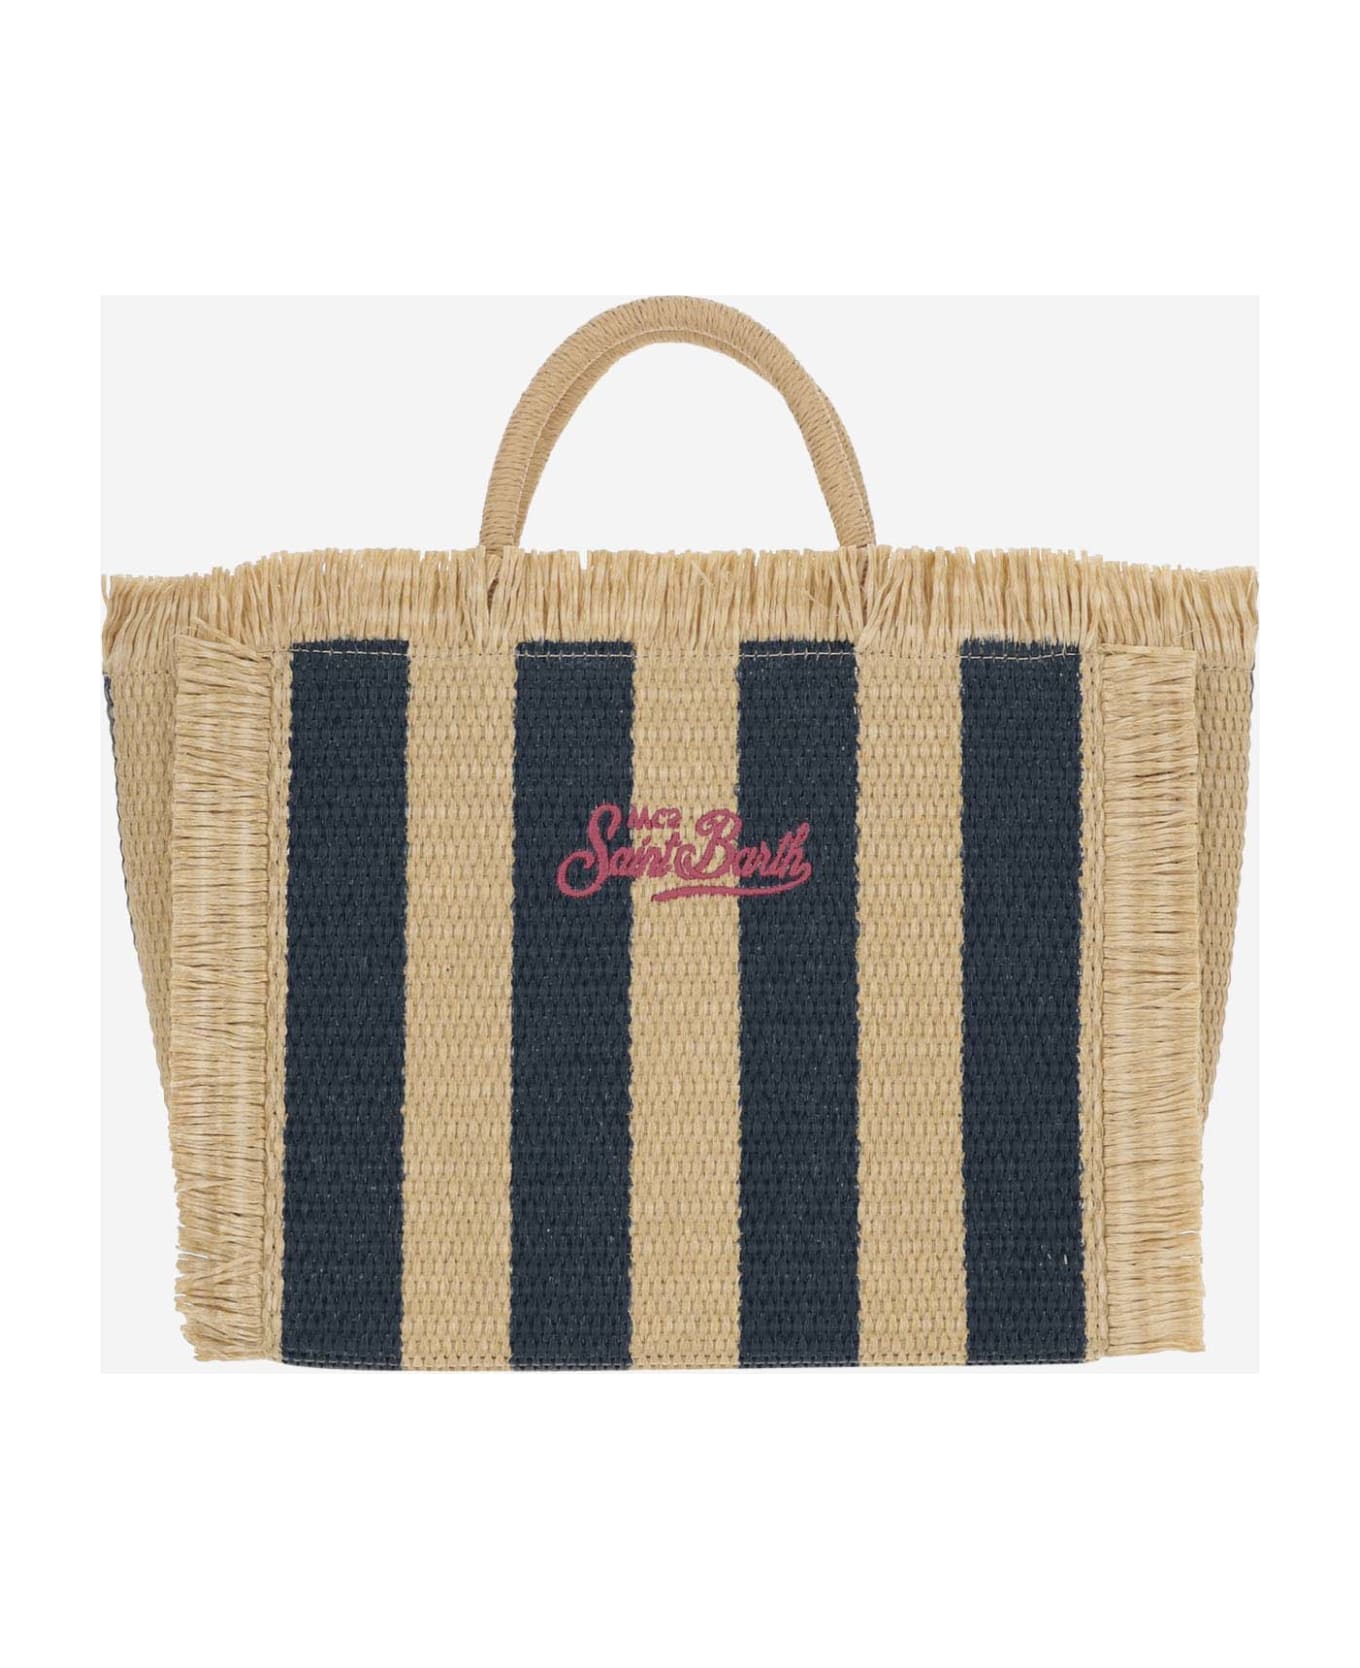 MC2 Saint Barth Colette Tote Bag With Striped Pattern - Red トートバッグ